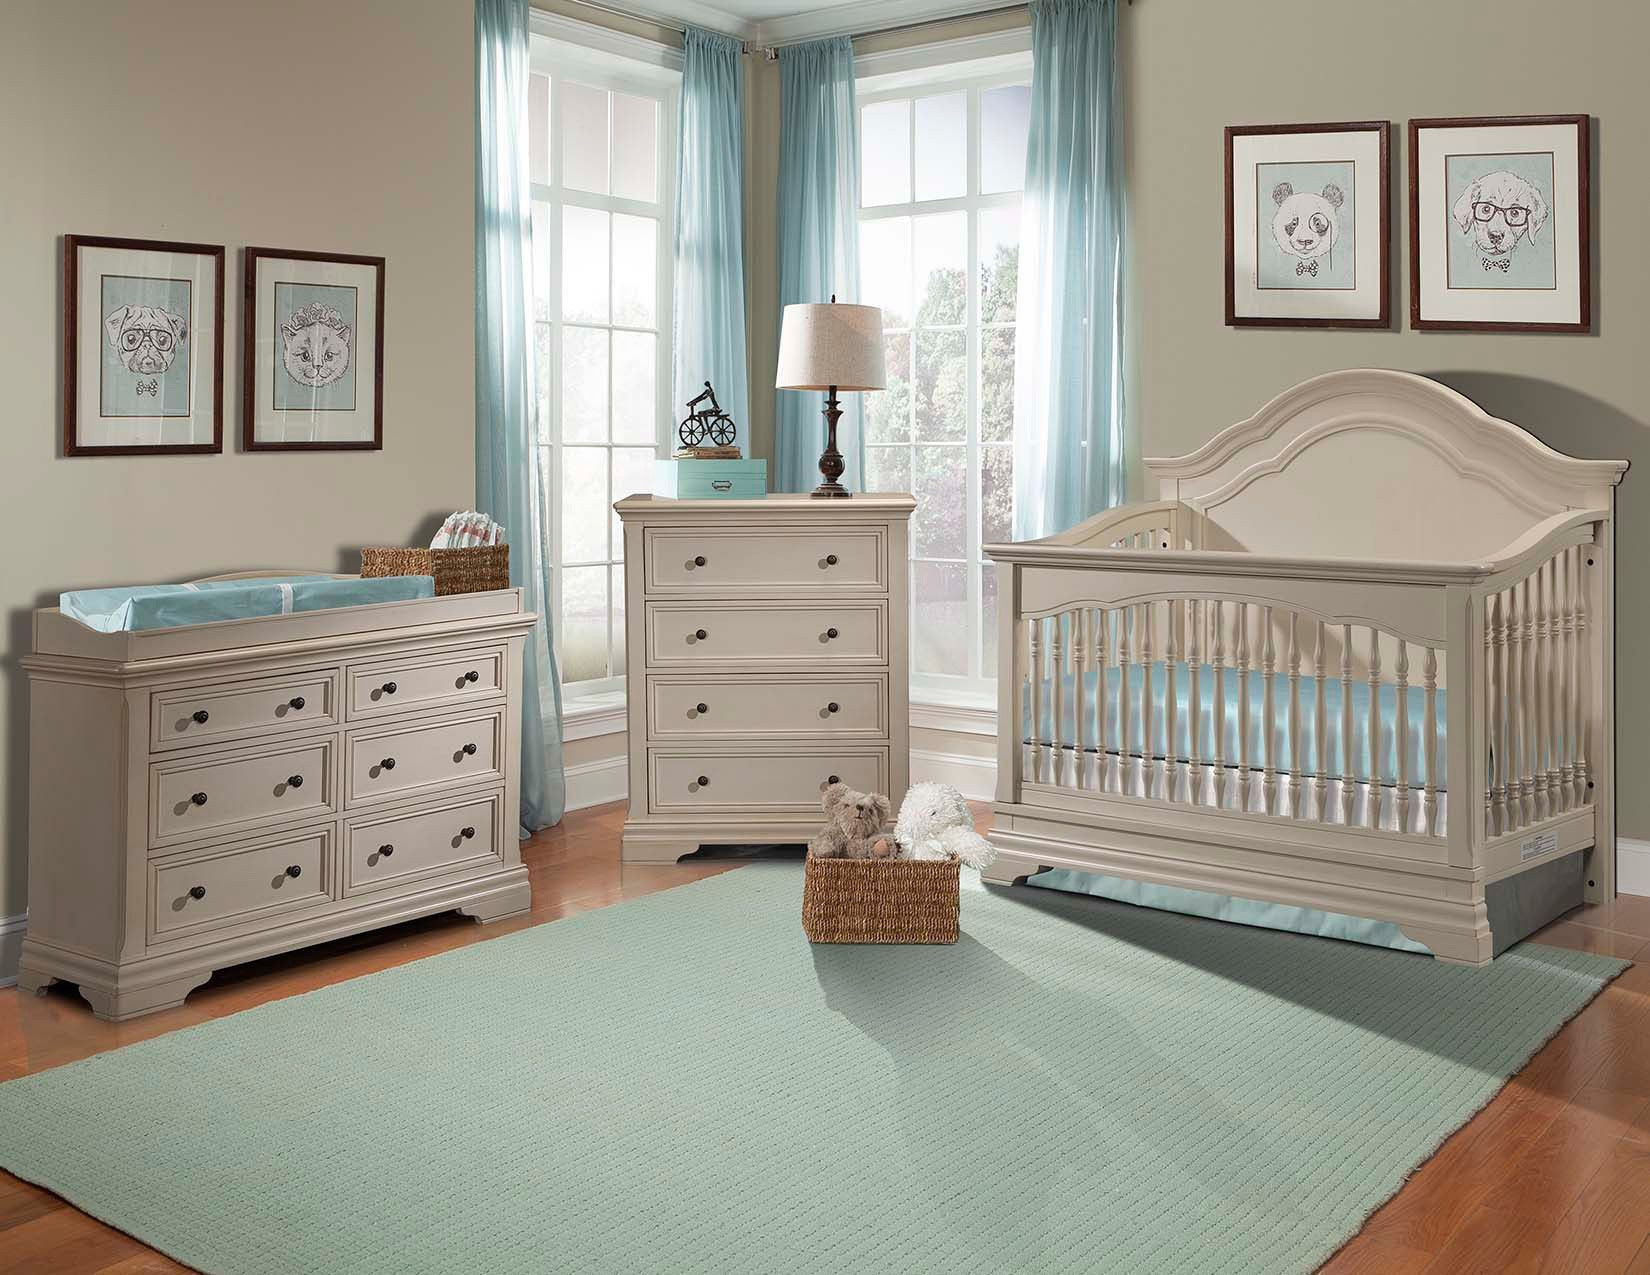 Dresser For Baby Room
 Stella Baby and Child Athena 3 Piece Nursery Set in